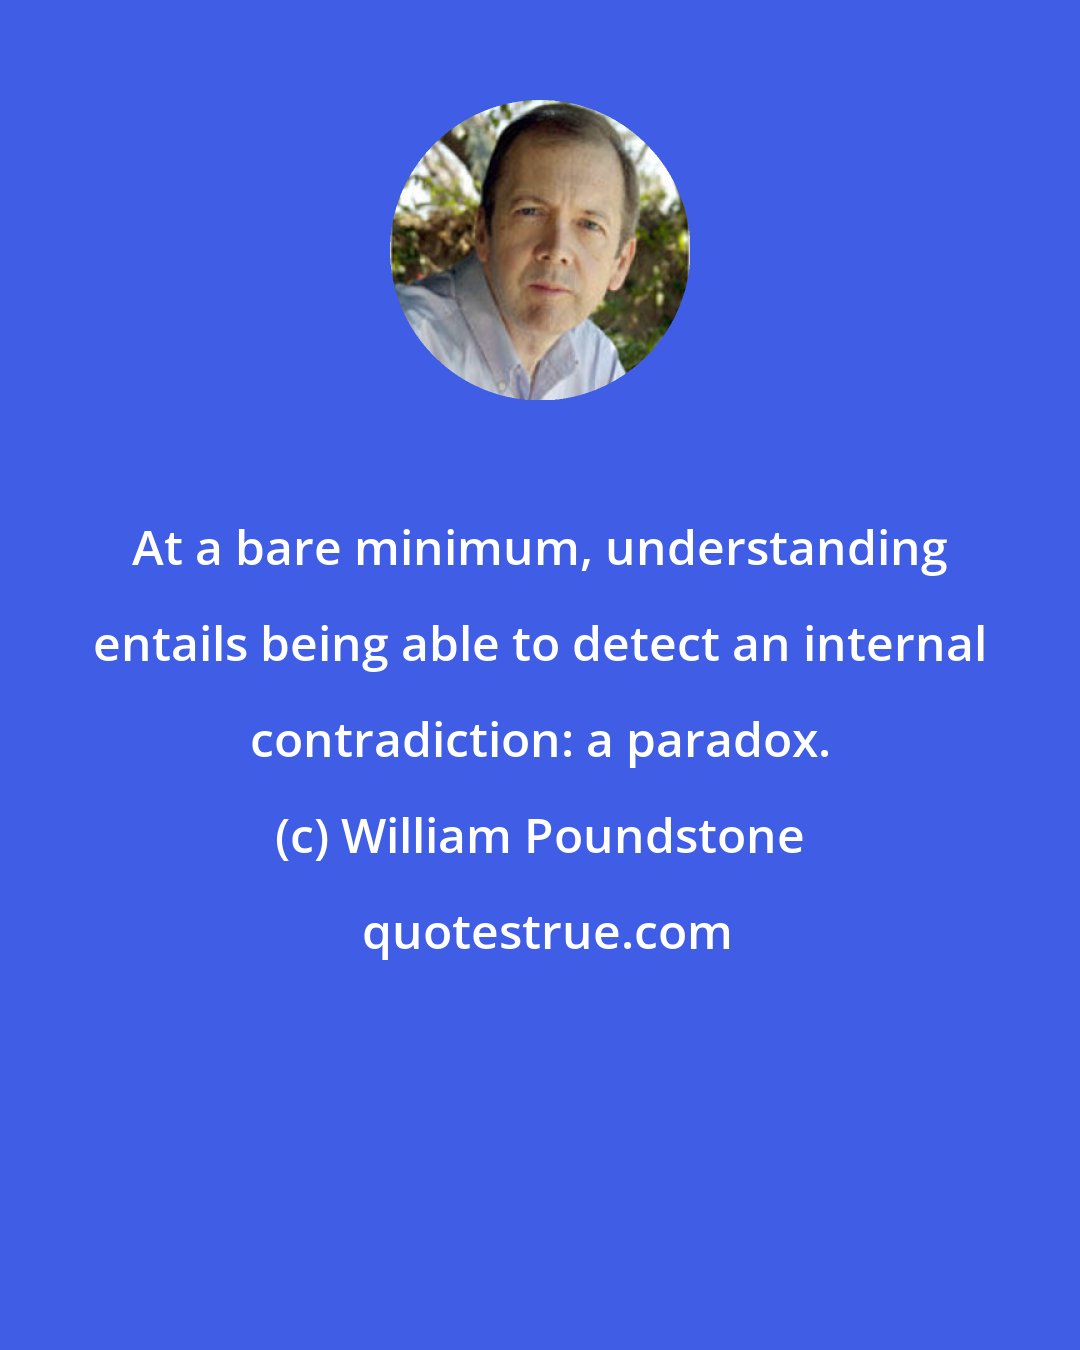 William Poundstone: At a bare minimum, understanding entails being able to detect an internal contradiction: a paradox.